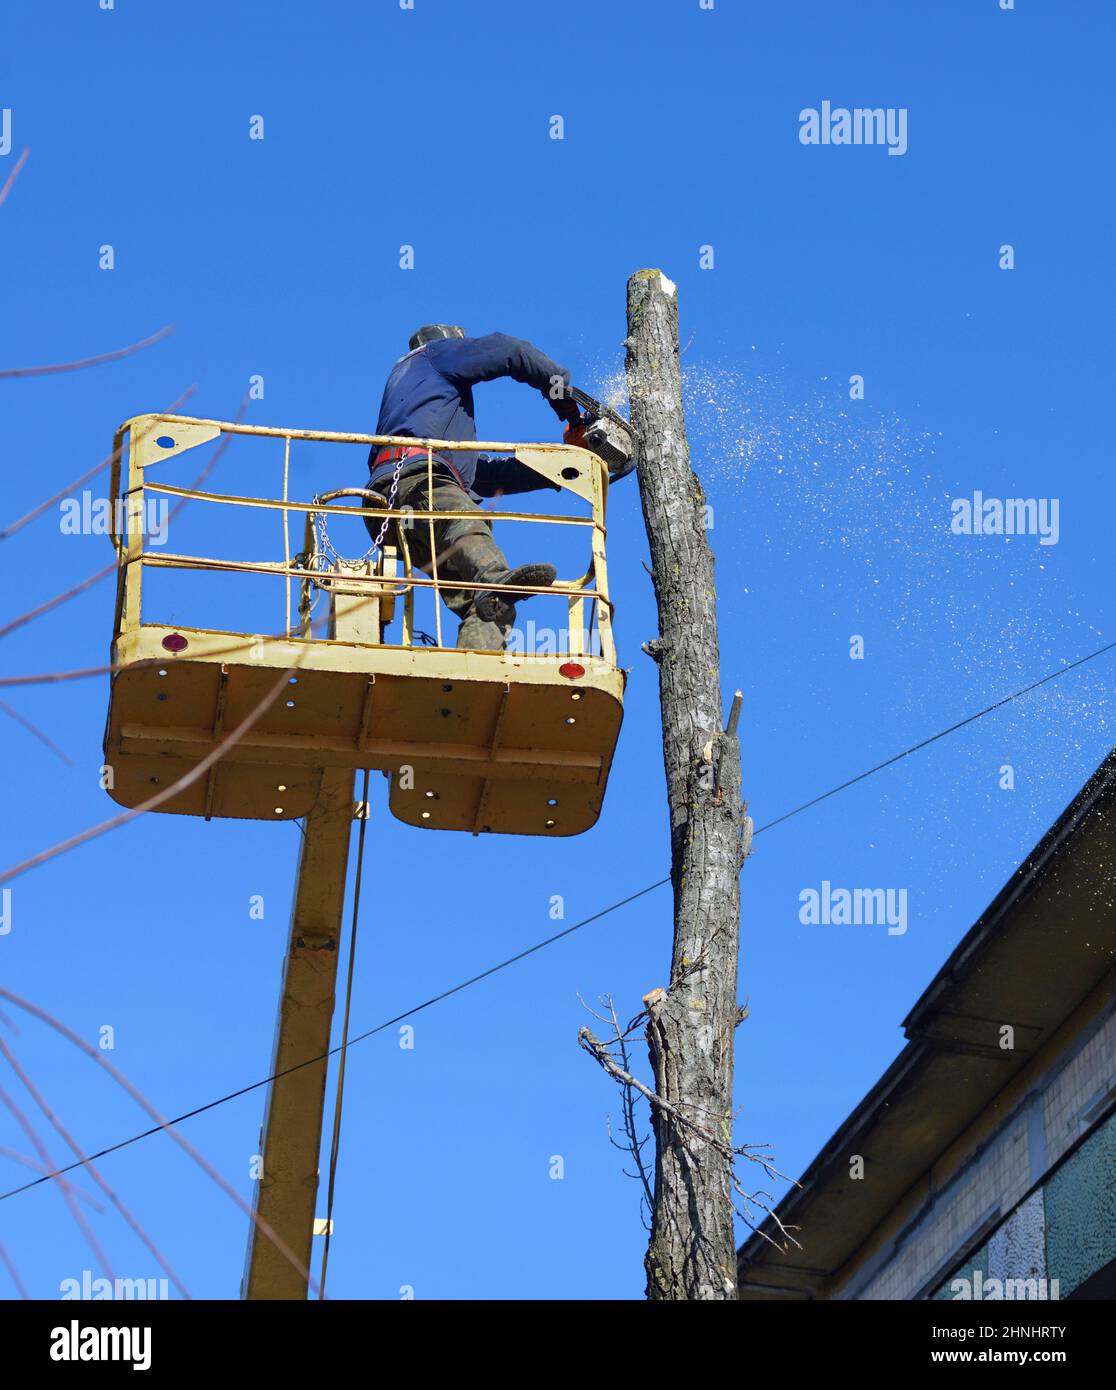 Municipal worker cutting dead standing tree with chainsaw using truck-mounted lift Stock Photo